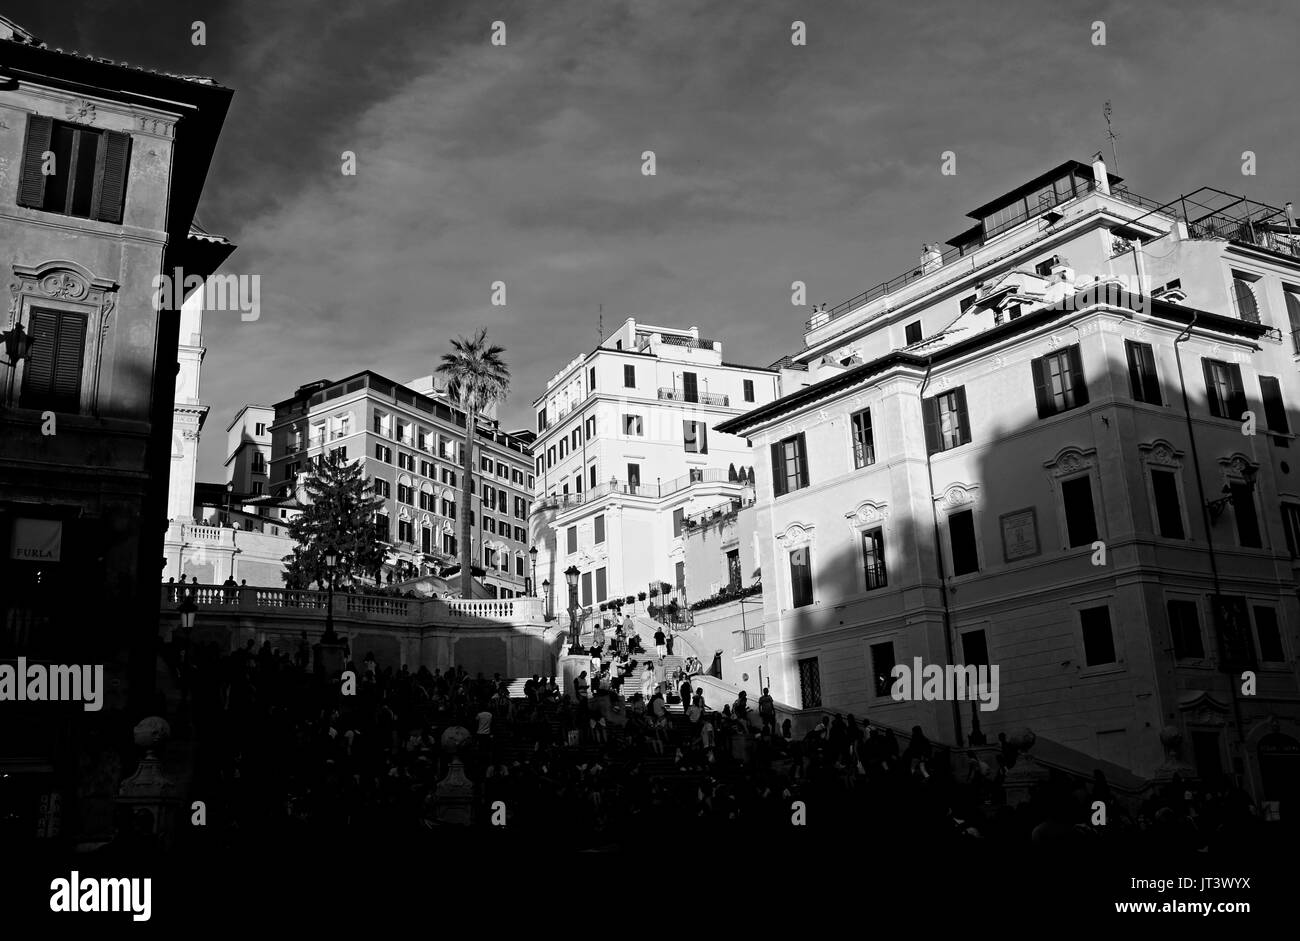 Rome Italy July 2017 - The famous Spanish Steps and Piazza di Spagna in the Tridente district Photograph taken by Simon Dack Stock Photo